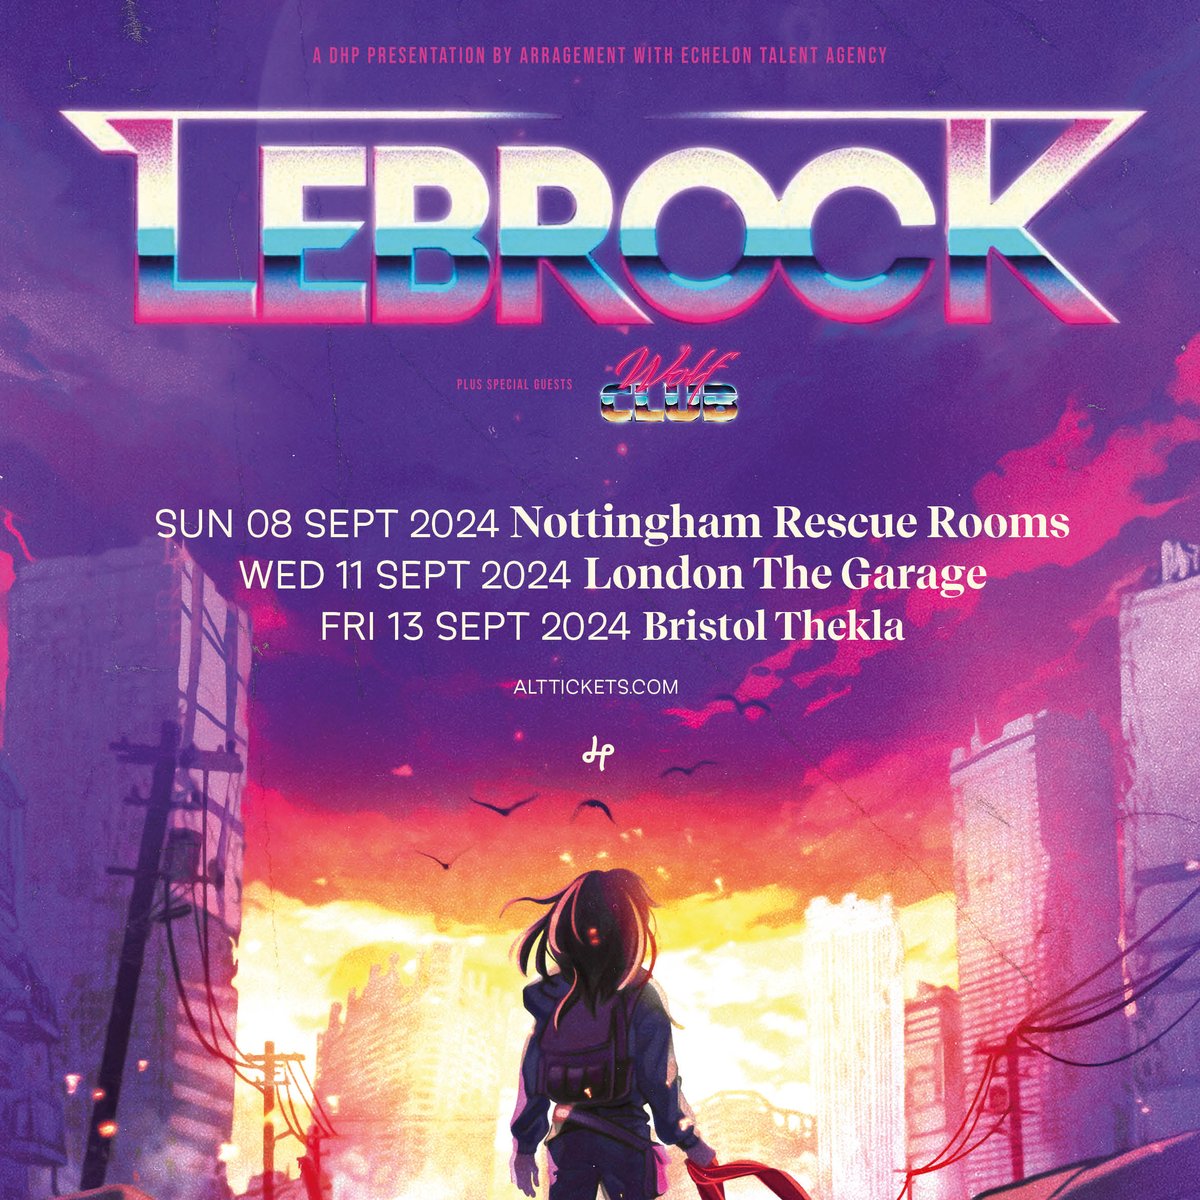 A cinematic journey into a blinding soundscape of guitars, synths and vocals, @lebrock play shows at @rescuerooms, @TheGarageHQ and @theklabristol this September, alongside special guests @wolfclubband! Tickets are on sale now: tinyurl.com/2csc5v74